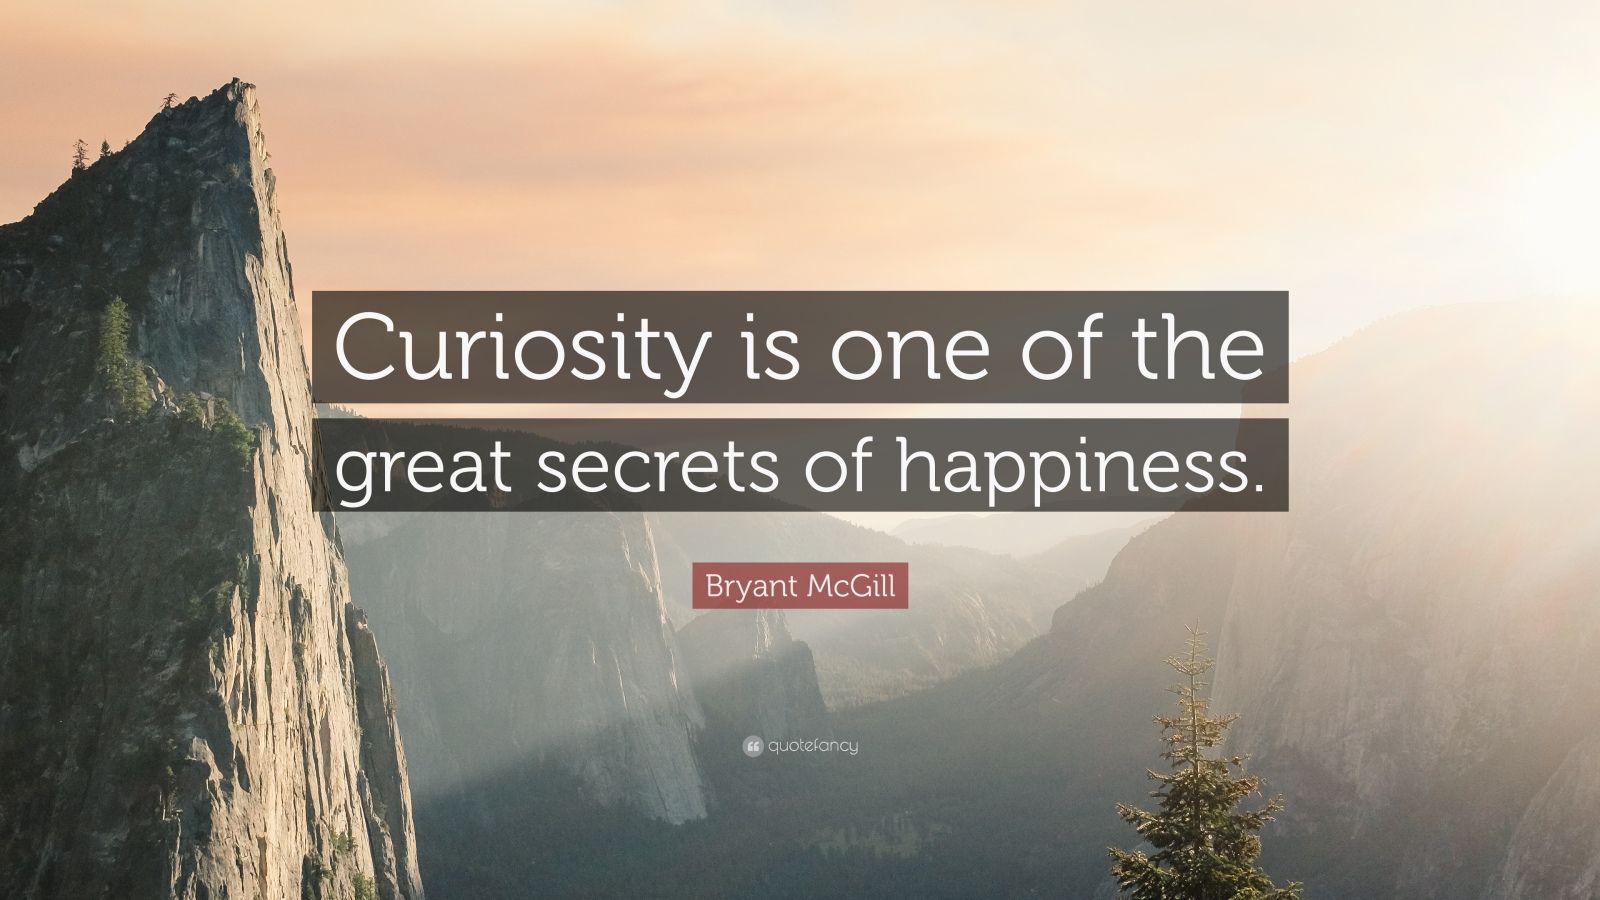 Bryant McGill Quote: “Curiosity is one of the great secrets of ...